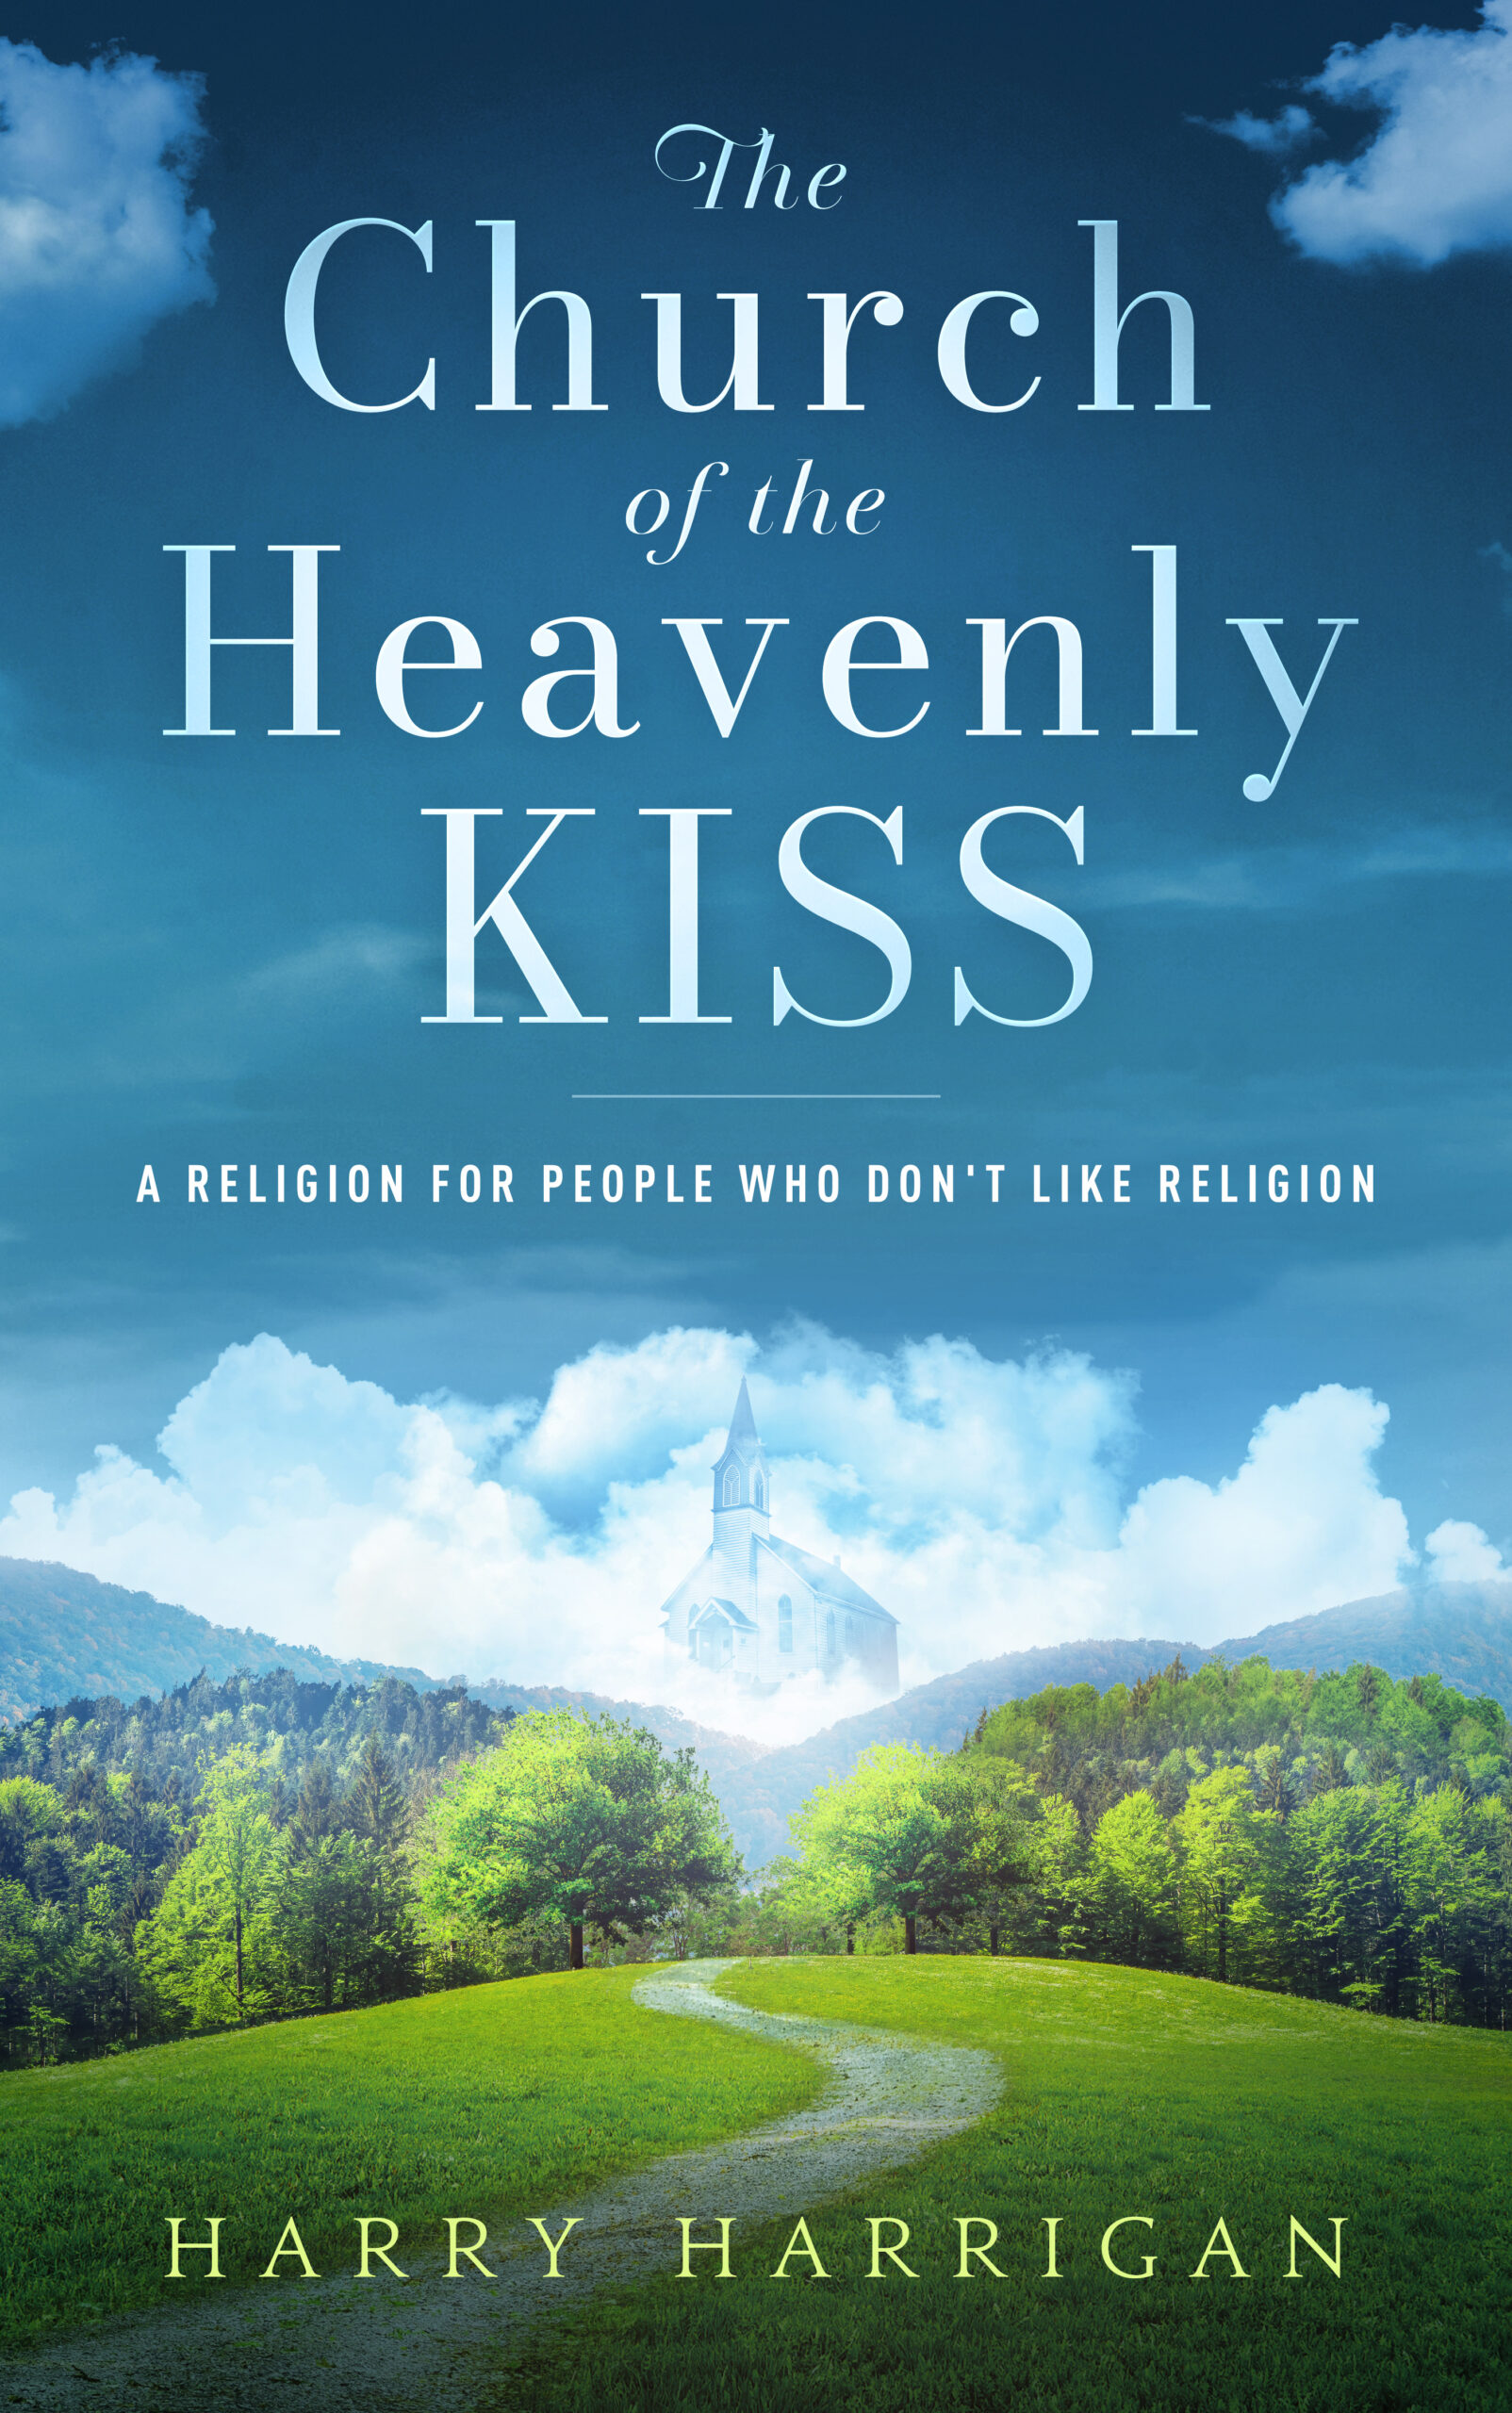 The Church of the Heavenly KISS by Harry Harrigan